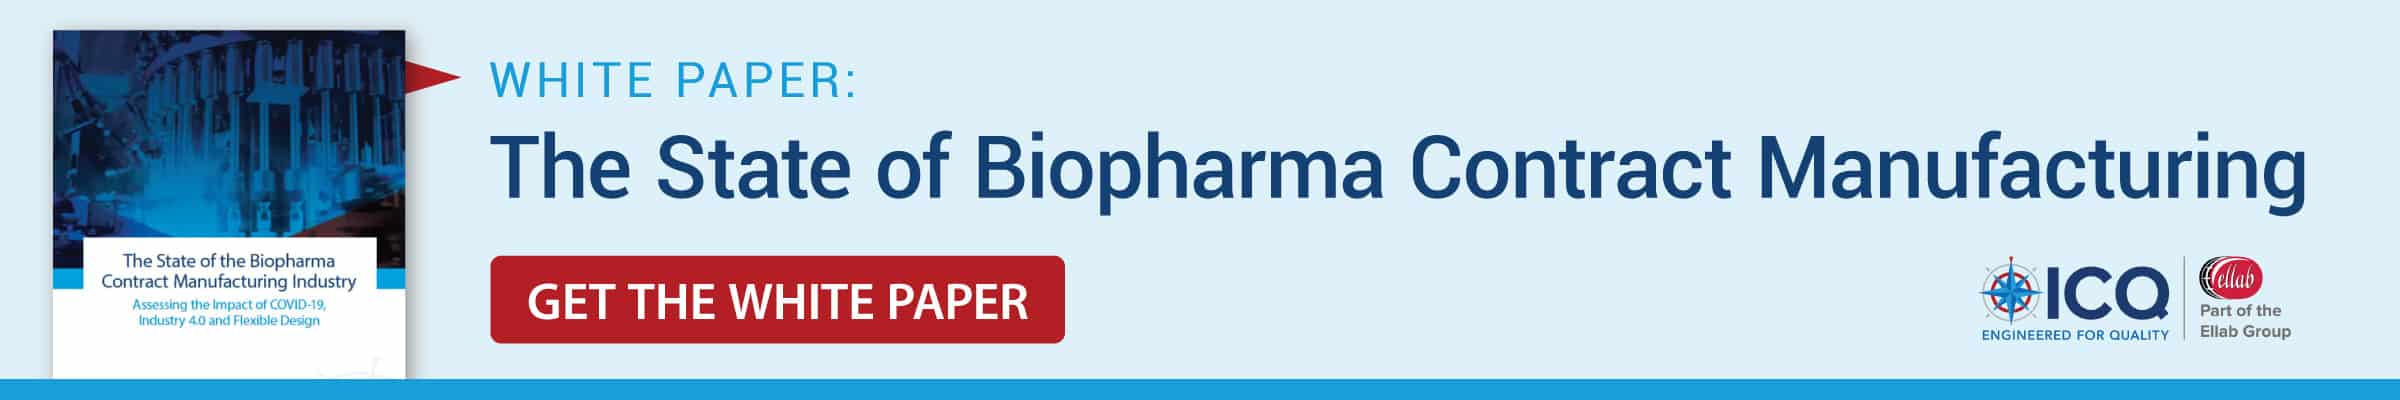 The State of Biopharma Contract Manufacturing White Paper Download